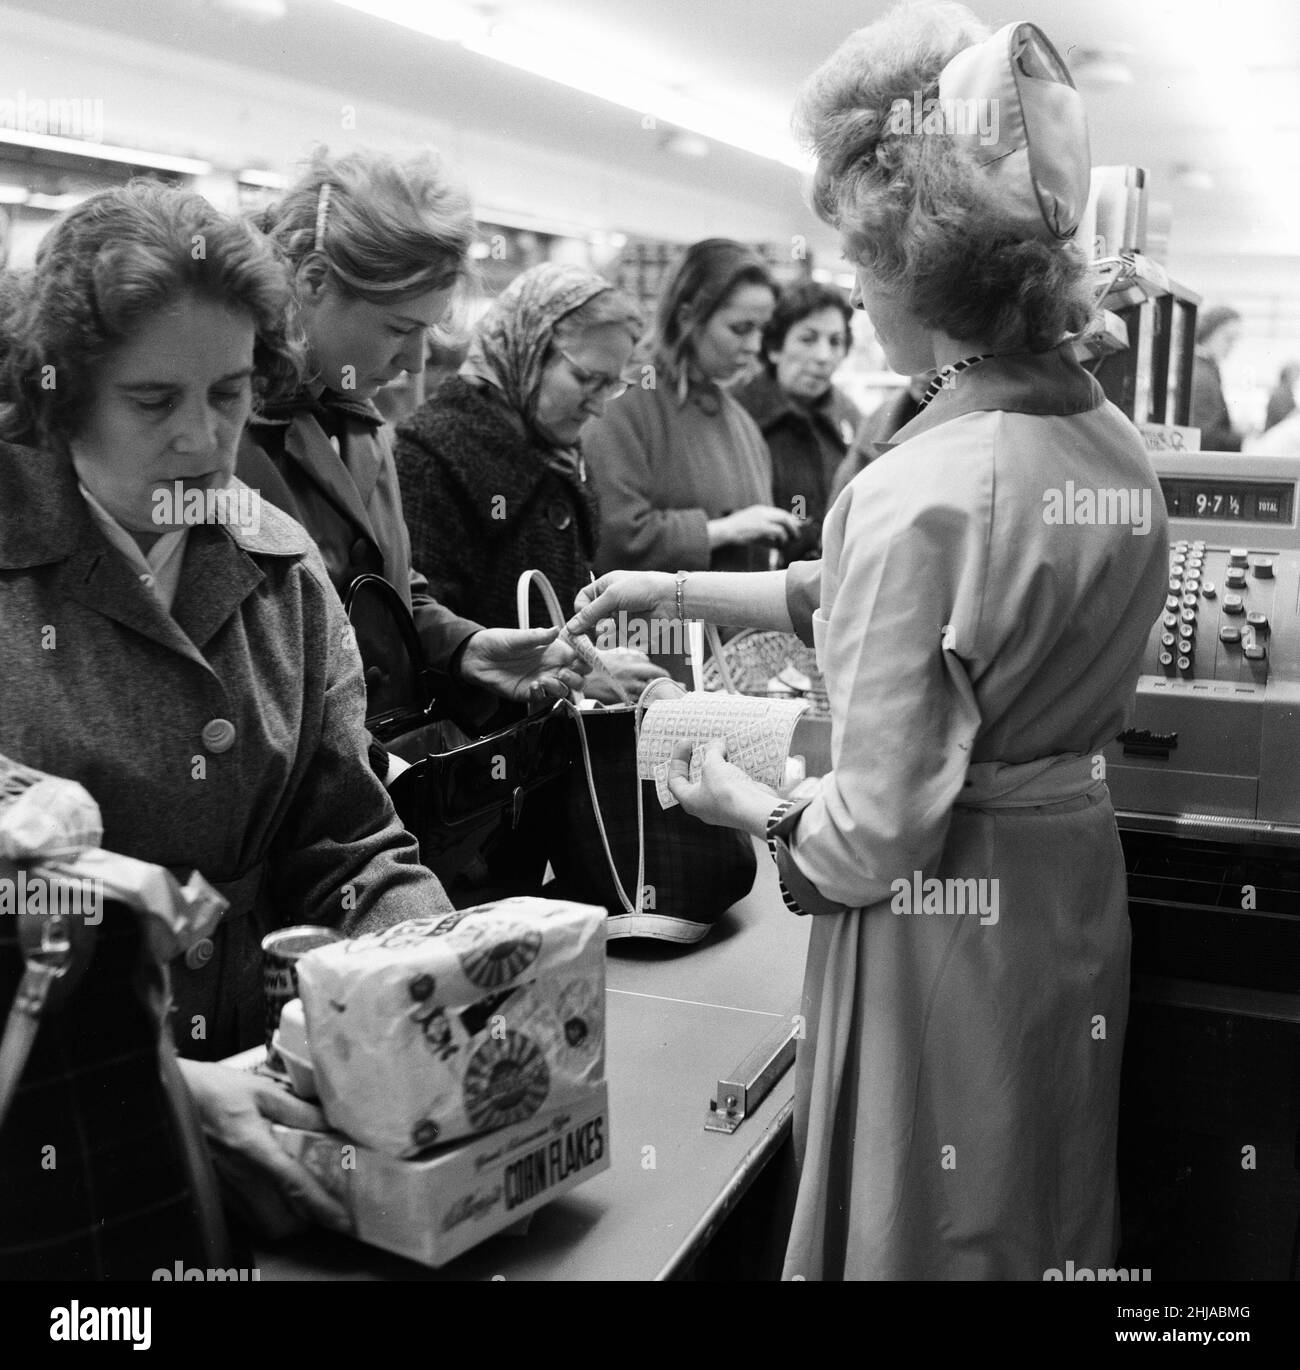 Shoppers, Fine Fare Supermarket, Wilton, London, 29th October 1963. Collect Green Shield Stamps at till after paying for goods. Green Shield Stamps is a British sales promotion scheme that rewards shoppers with stamps that could be redeemed, and used to buy gifts from a catalogue or from any affiliated retailer. Stock Photo